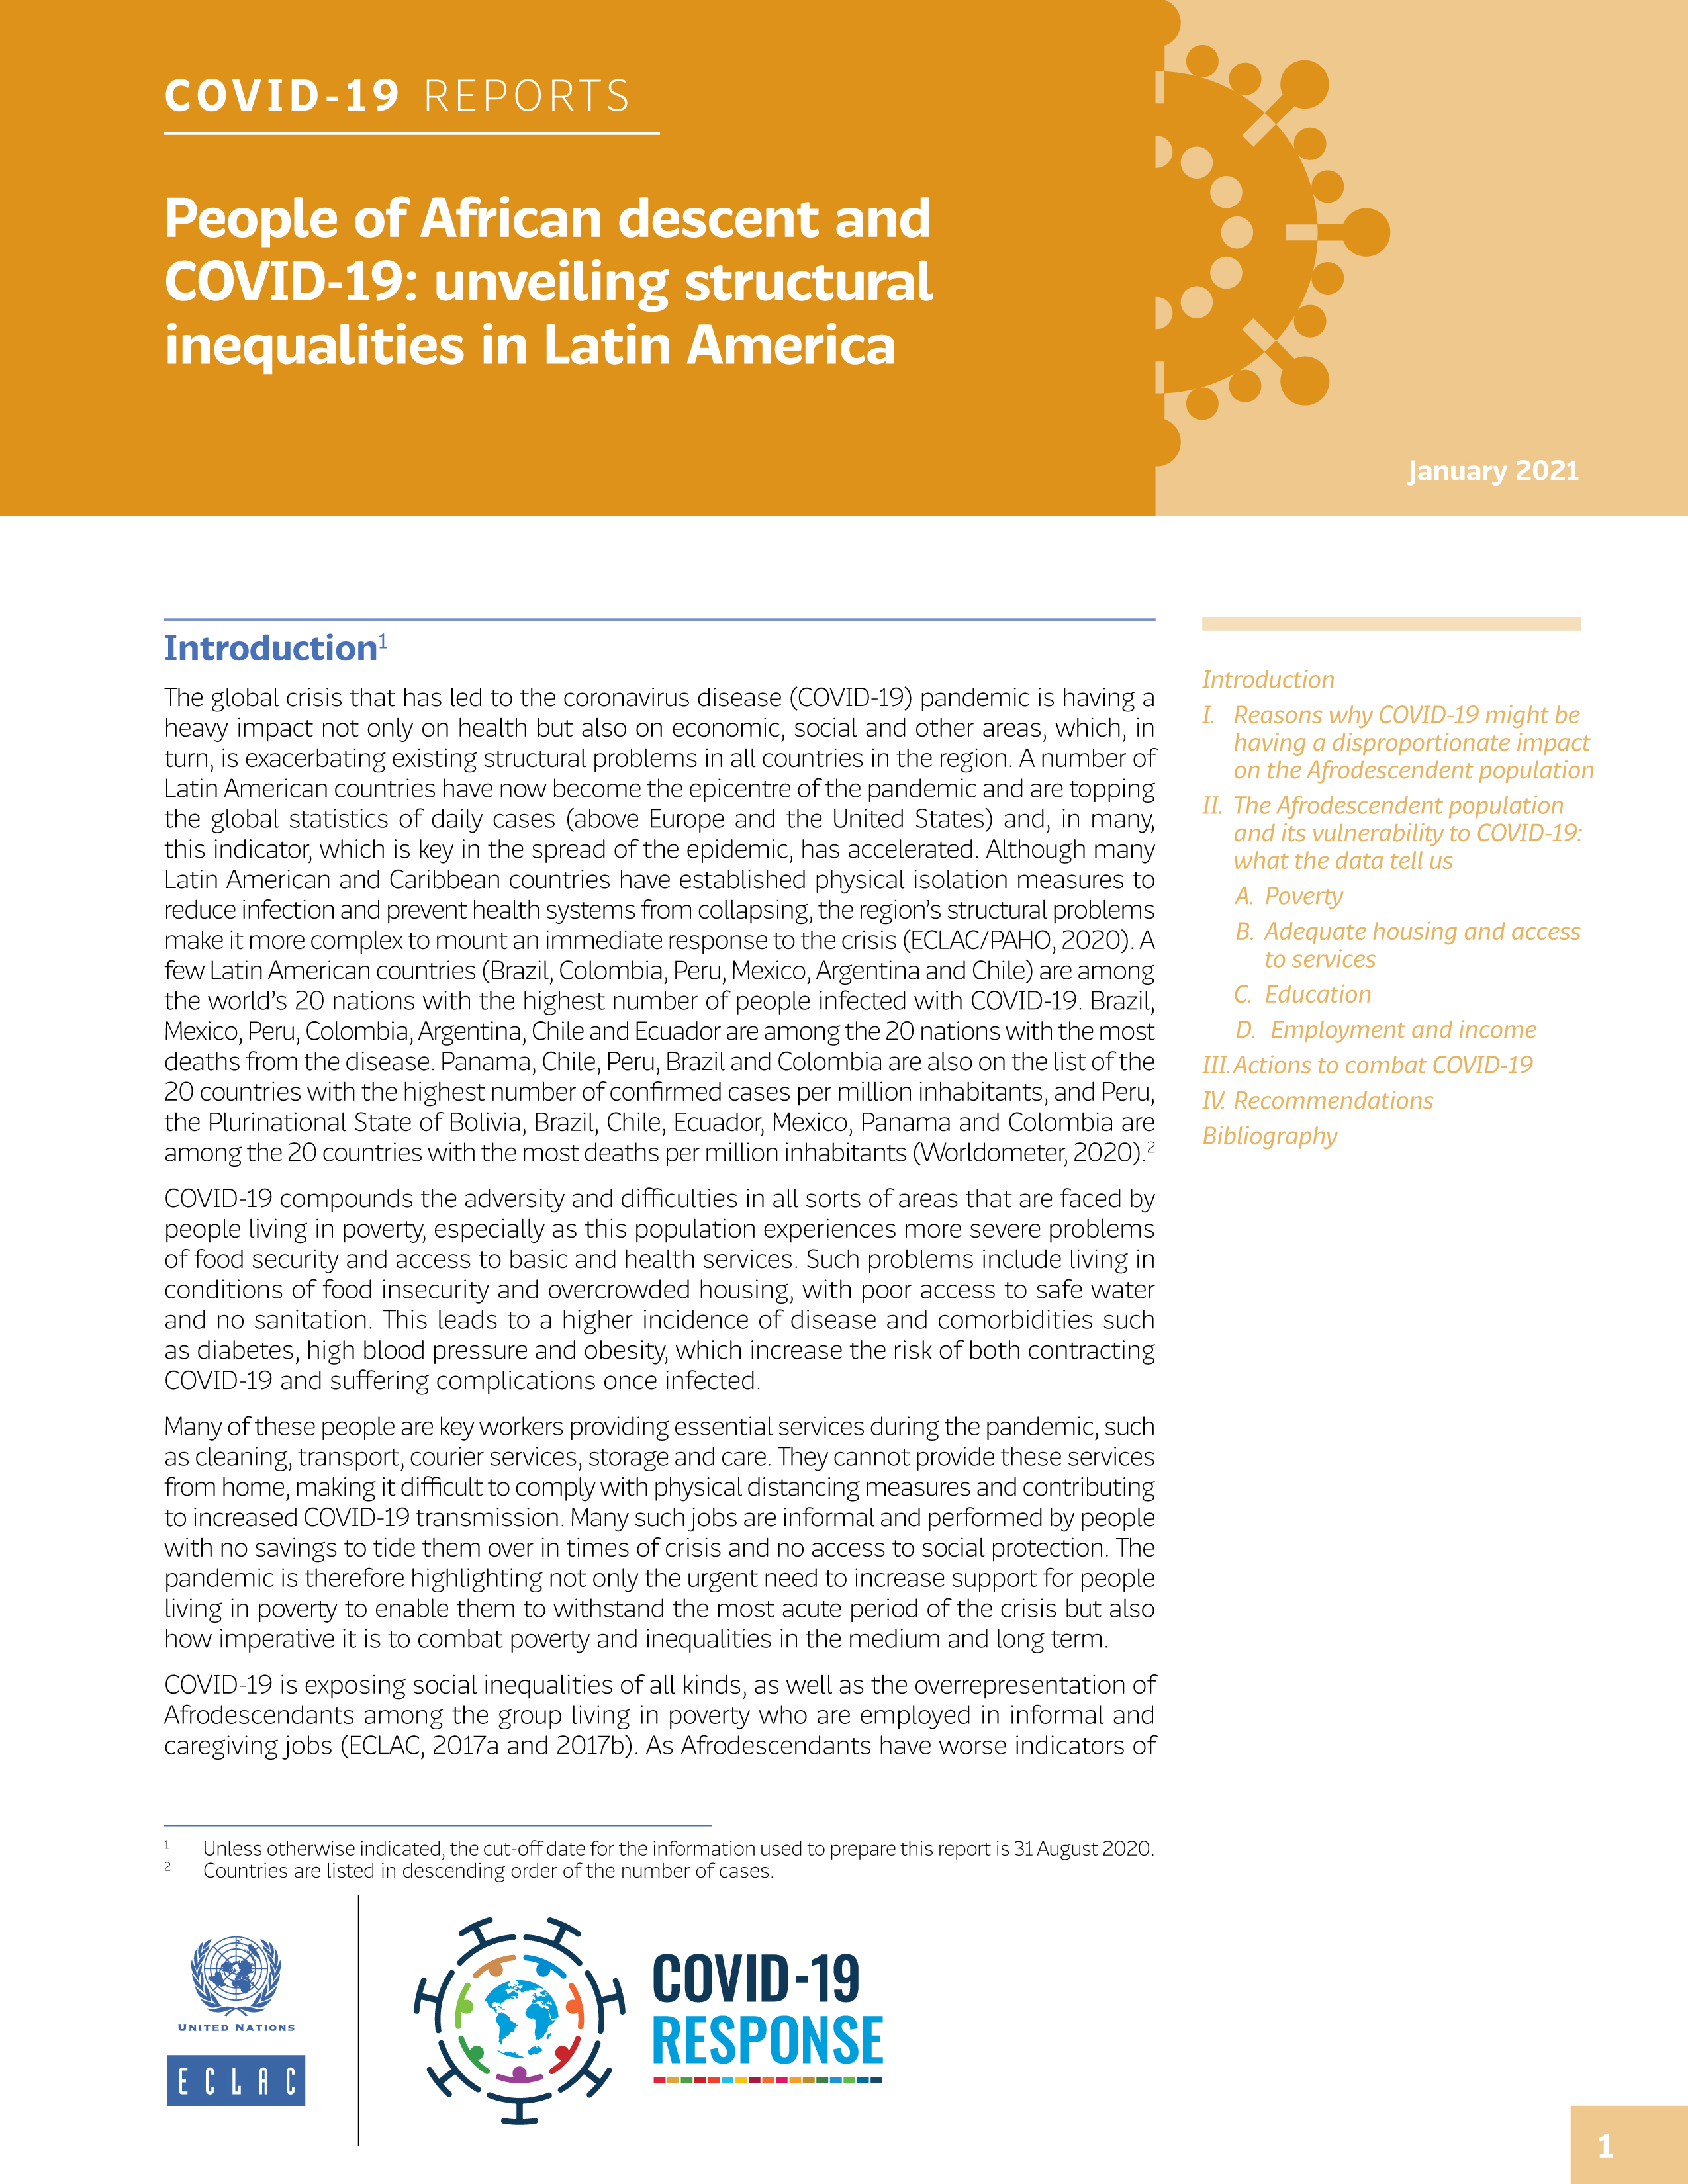 image of People of African Descent and COVID-19: Unveiling Structural Inequalities in Latin America